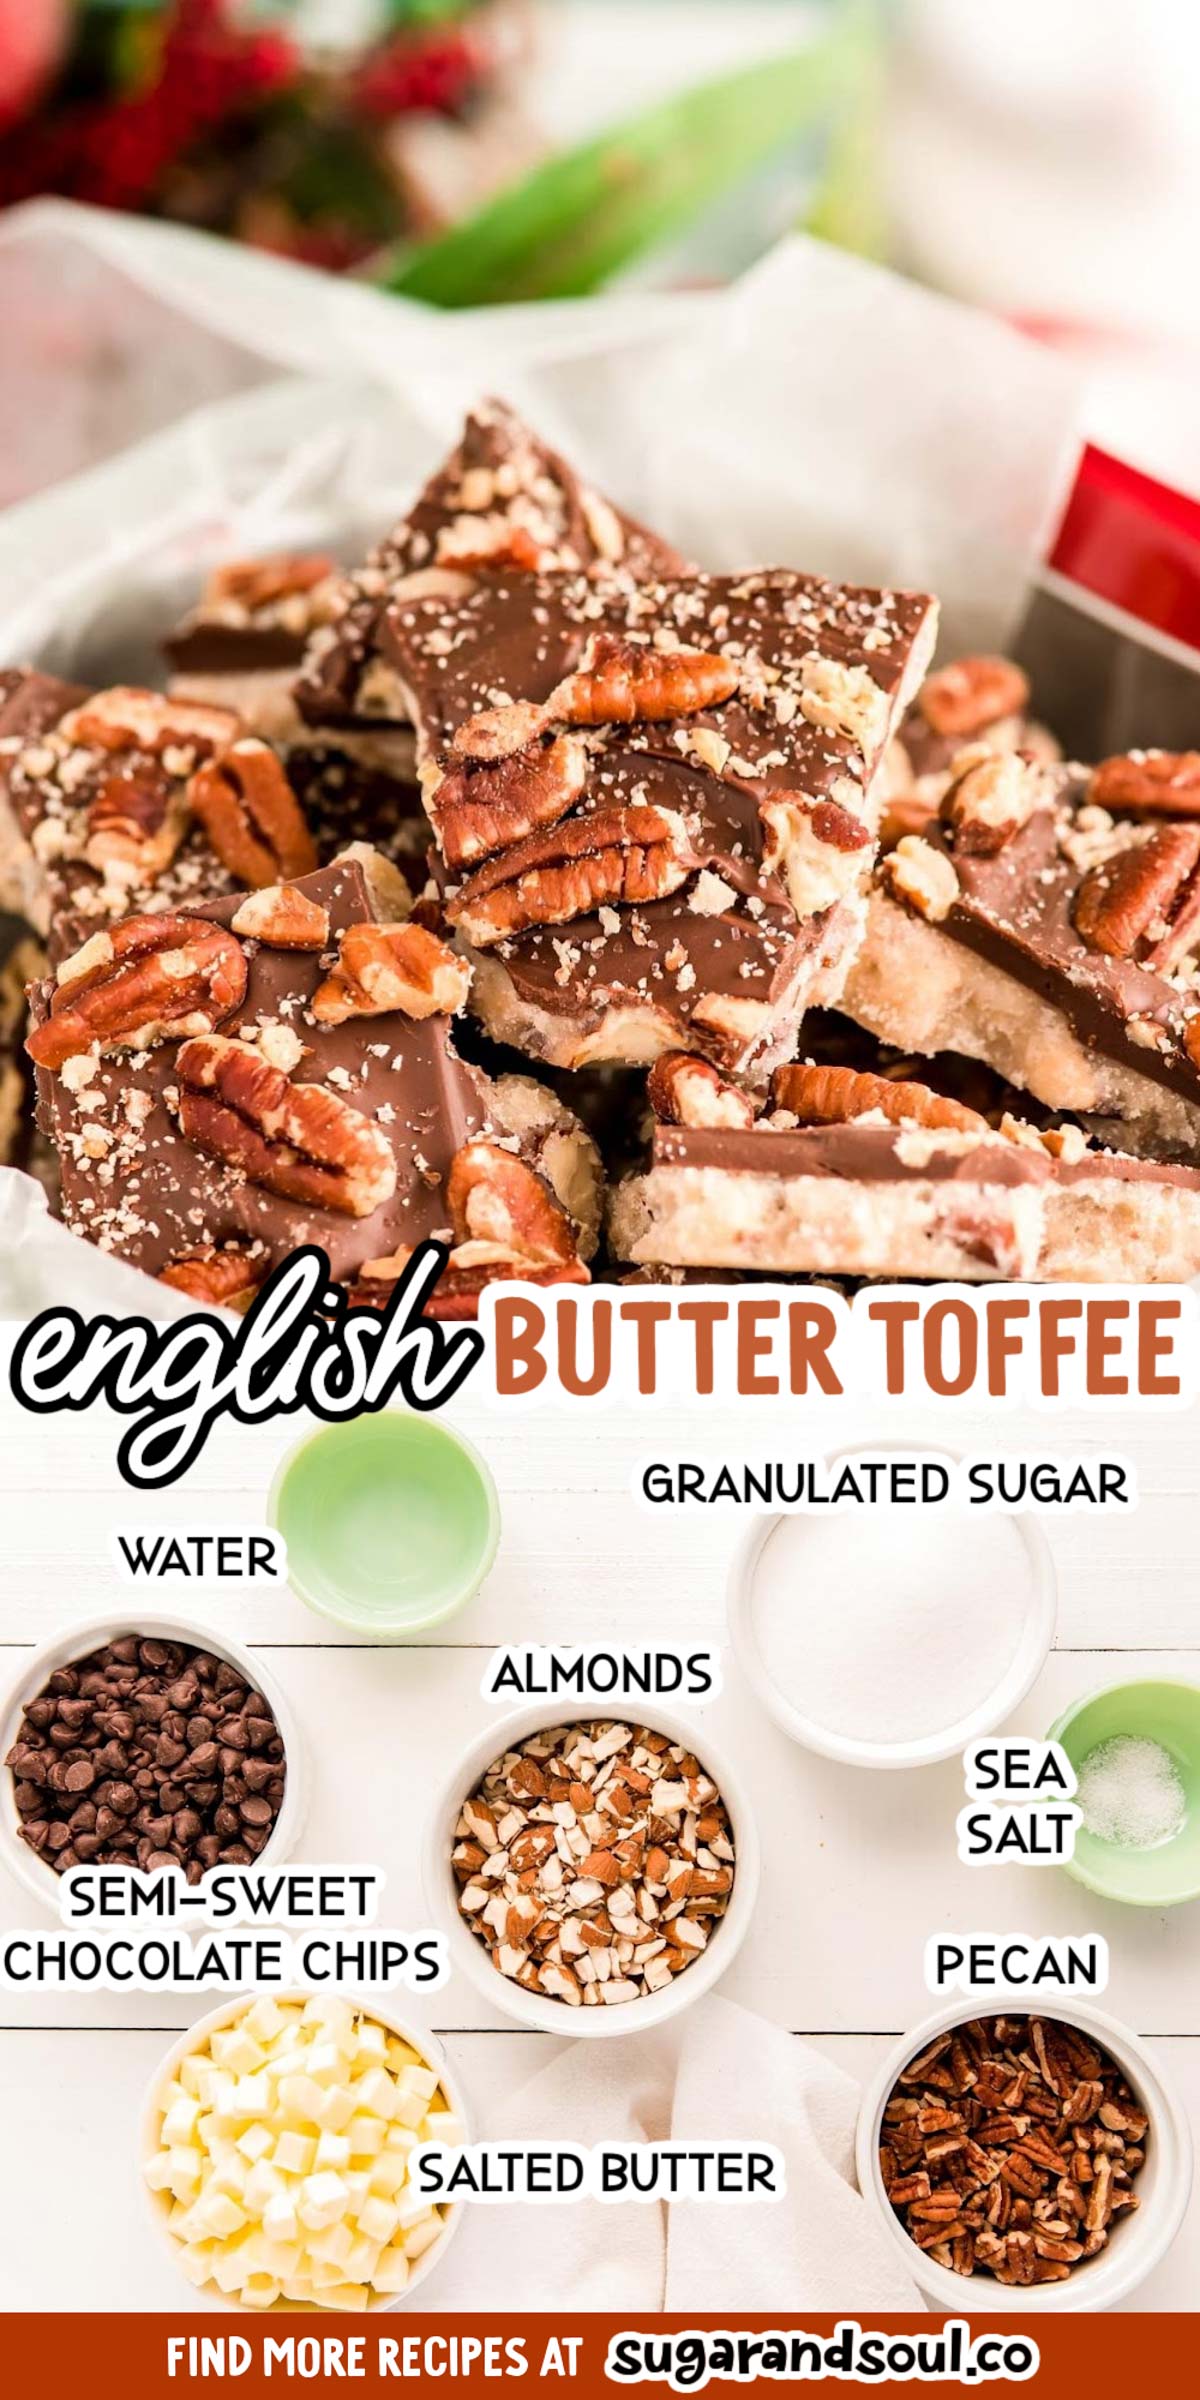 This Homemade English Butter Toffee is crunchy, buttery, and chocolaty and loaded with almonds and pecans for a rich and decadent candy recipe that's perfect for sharing! via @sugarandsoulco